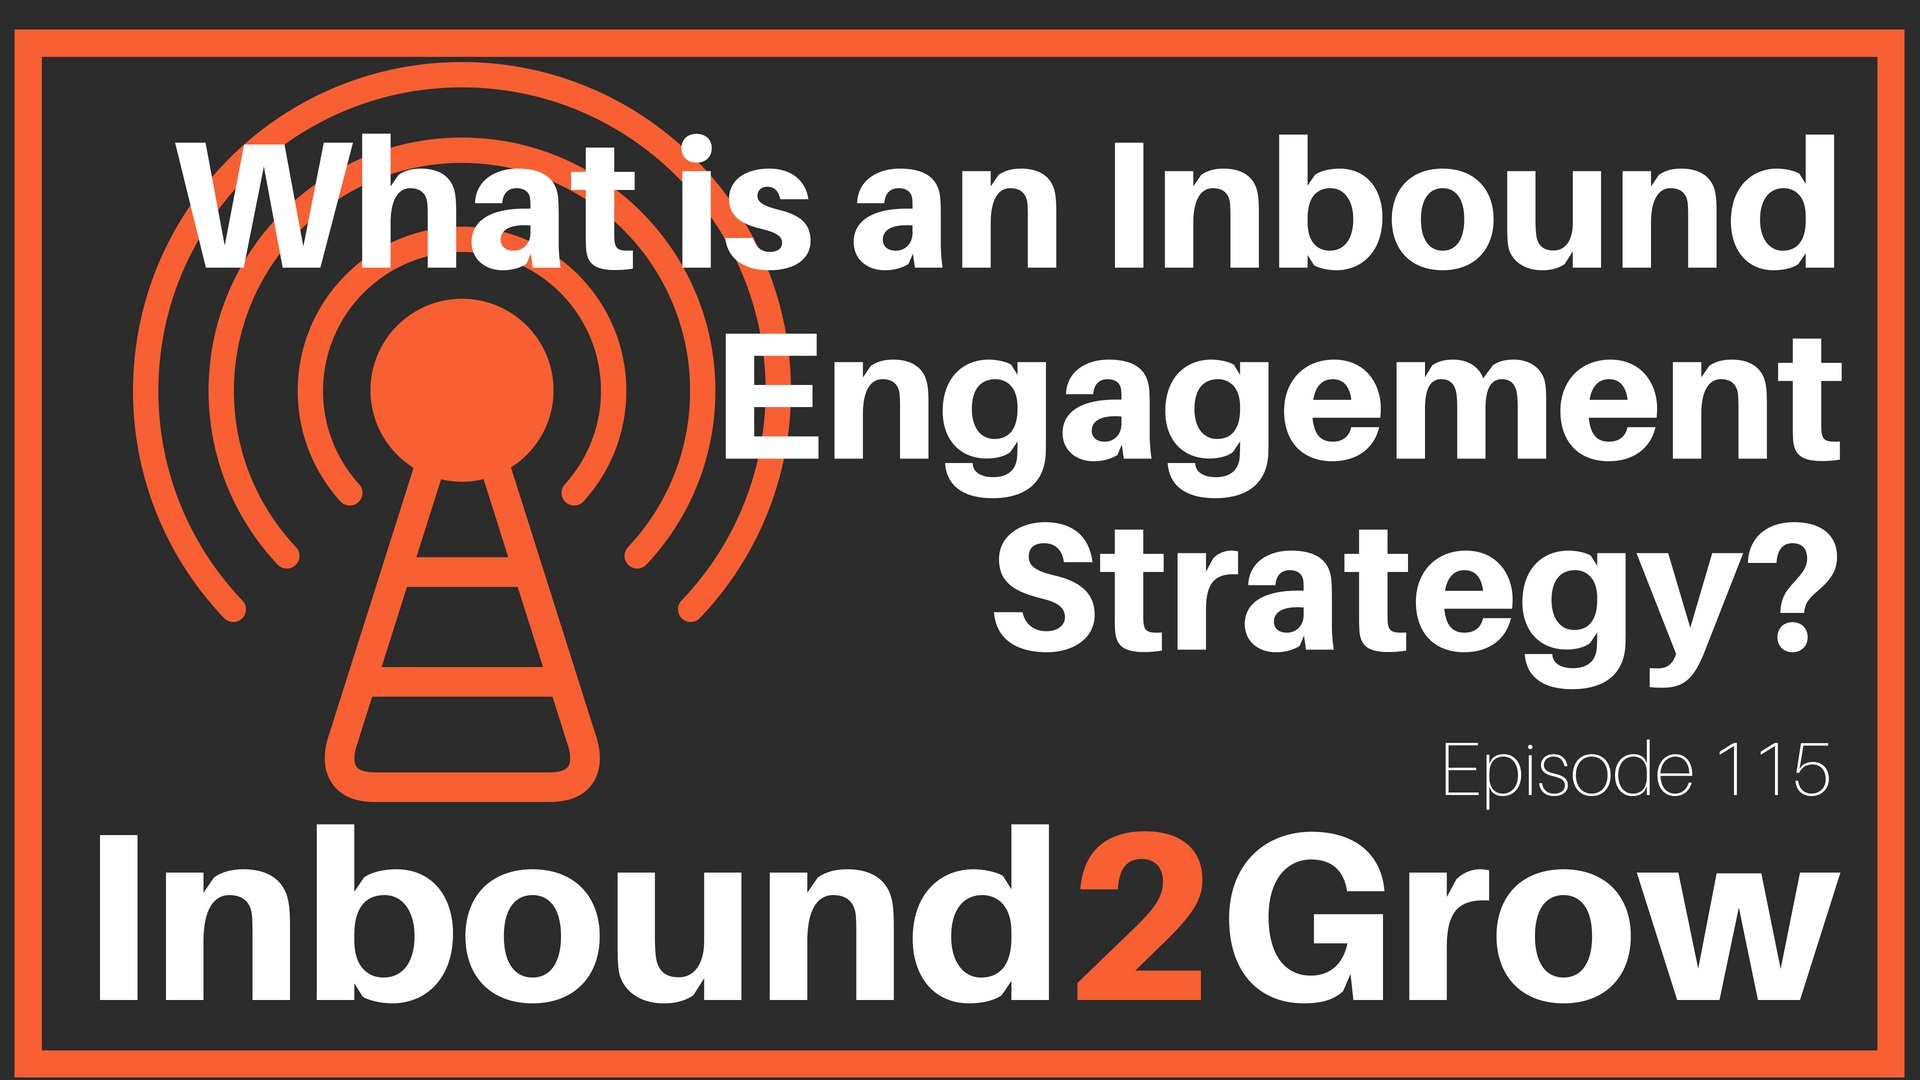 Episode 115: What is an Inbound Engagement Strategy?